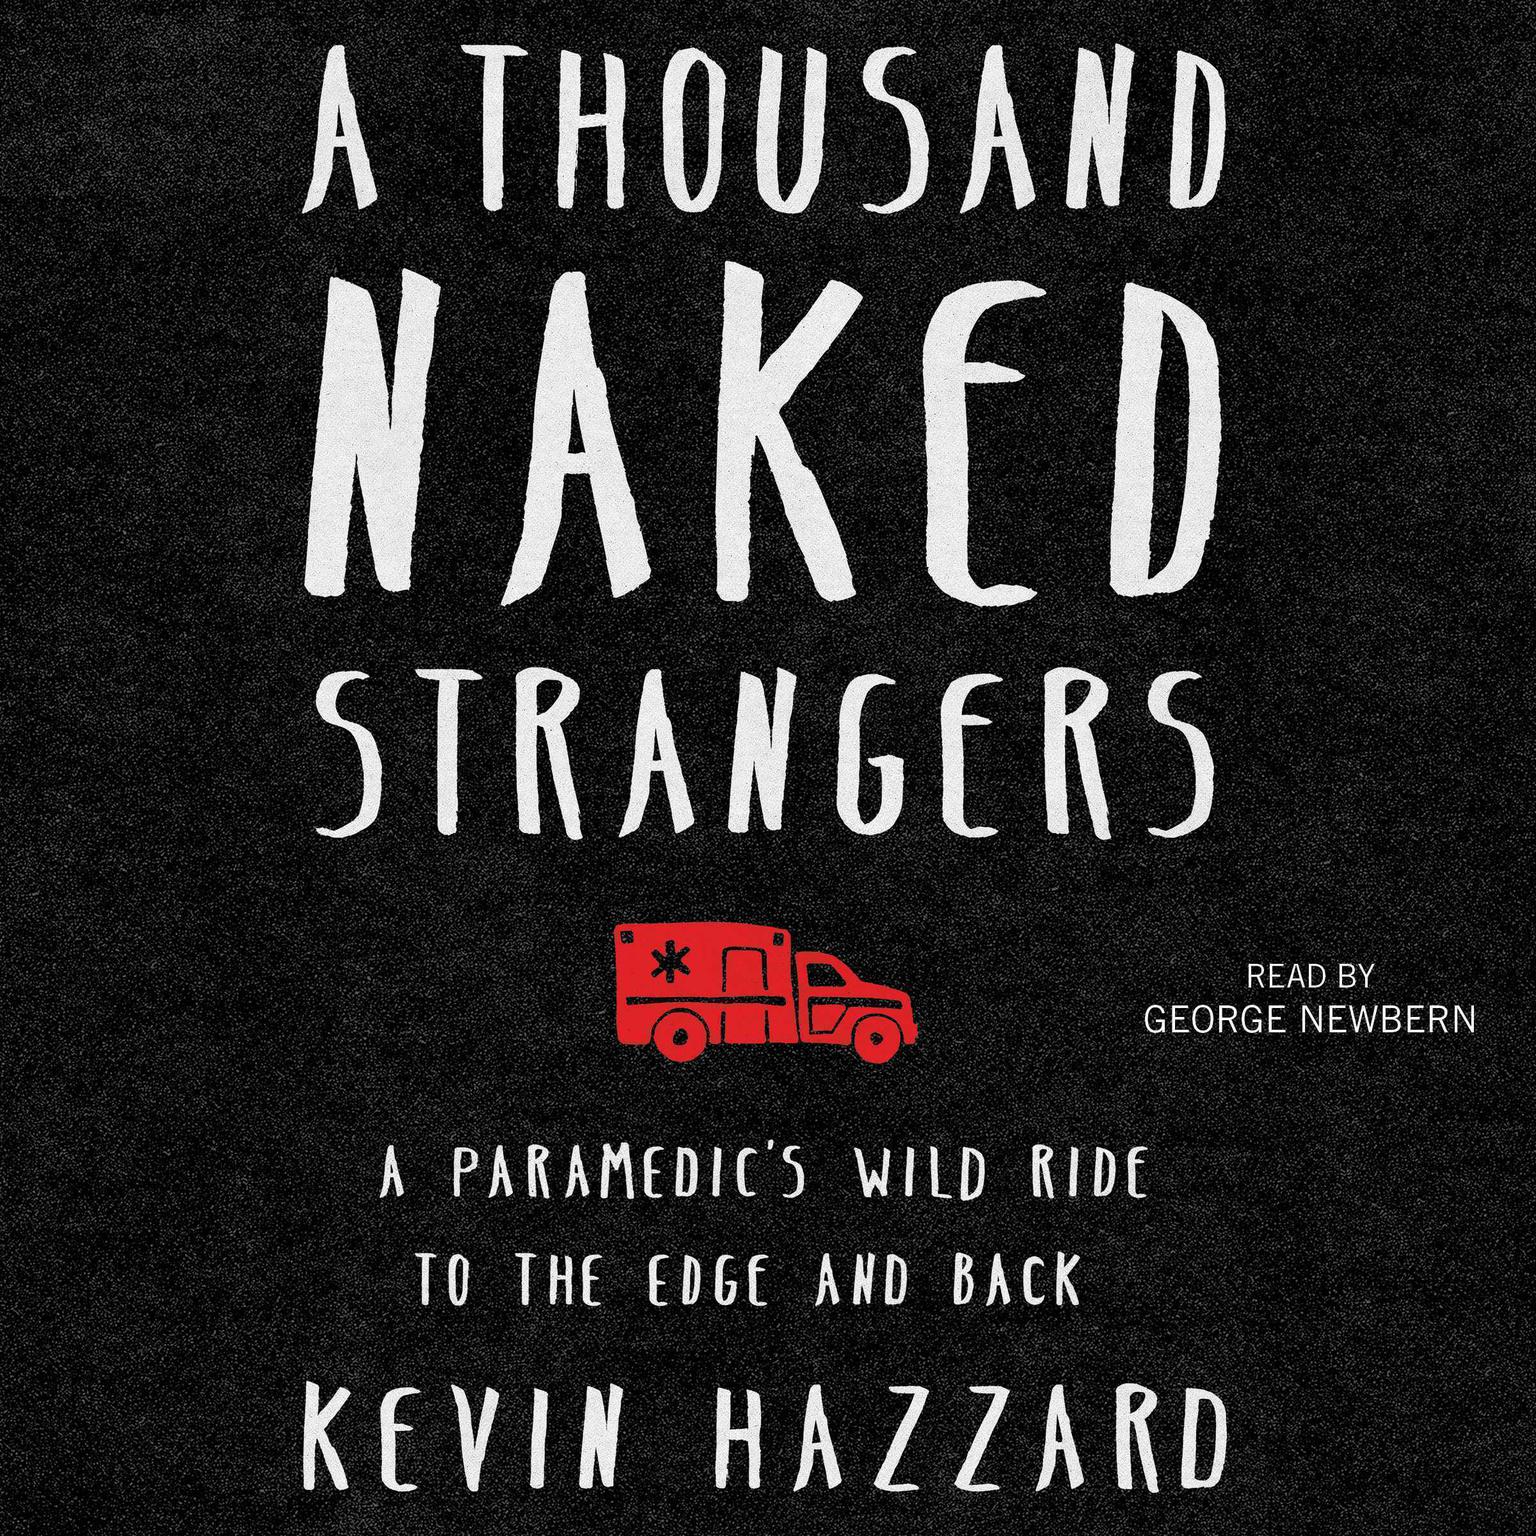 A Thousand Naked Strangers: A Paramedics Wild Ride to the Edge and Back Audiobook, by Kevin Hazzard